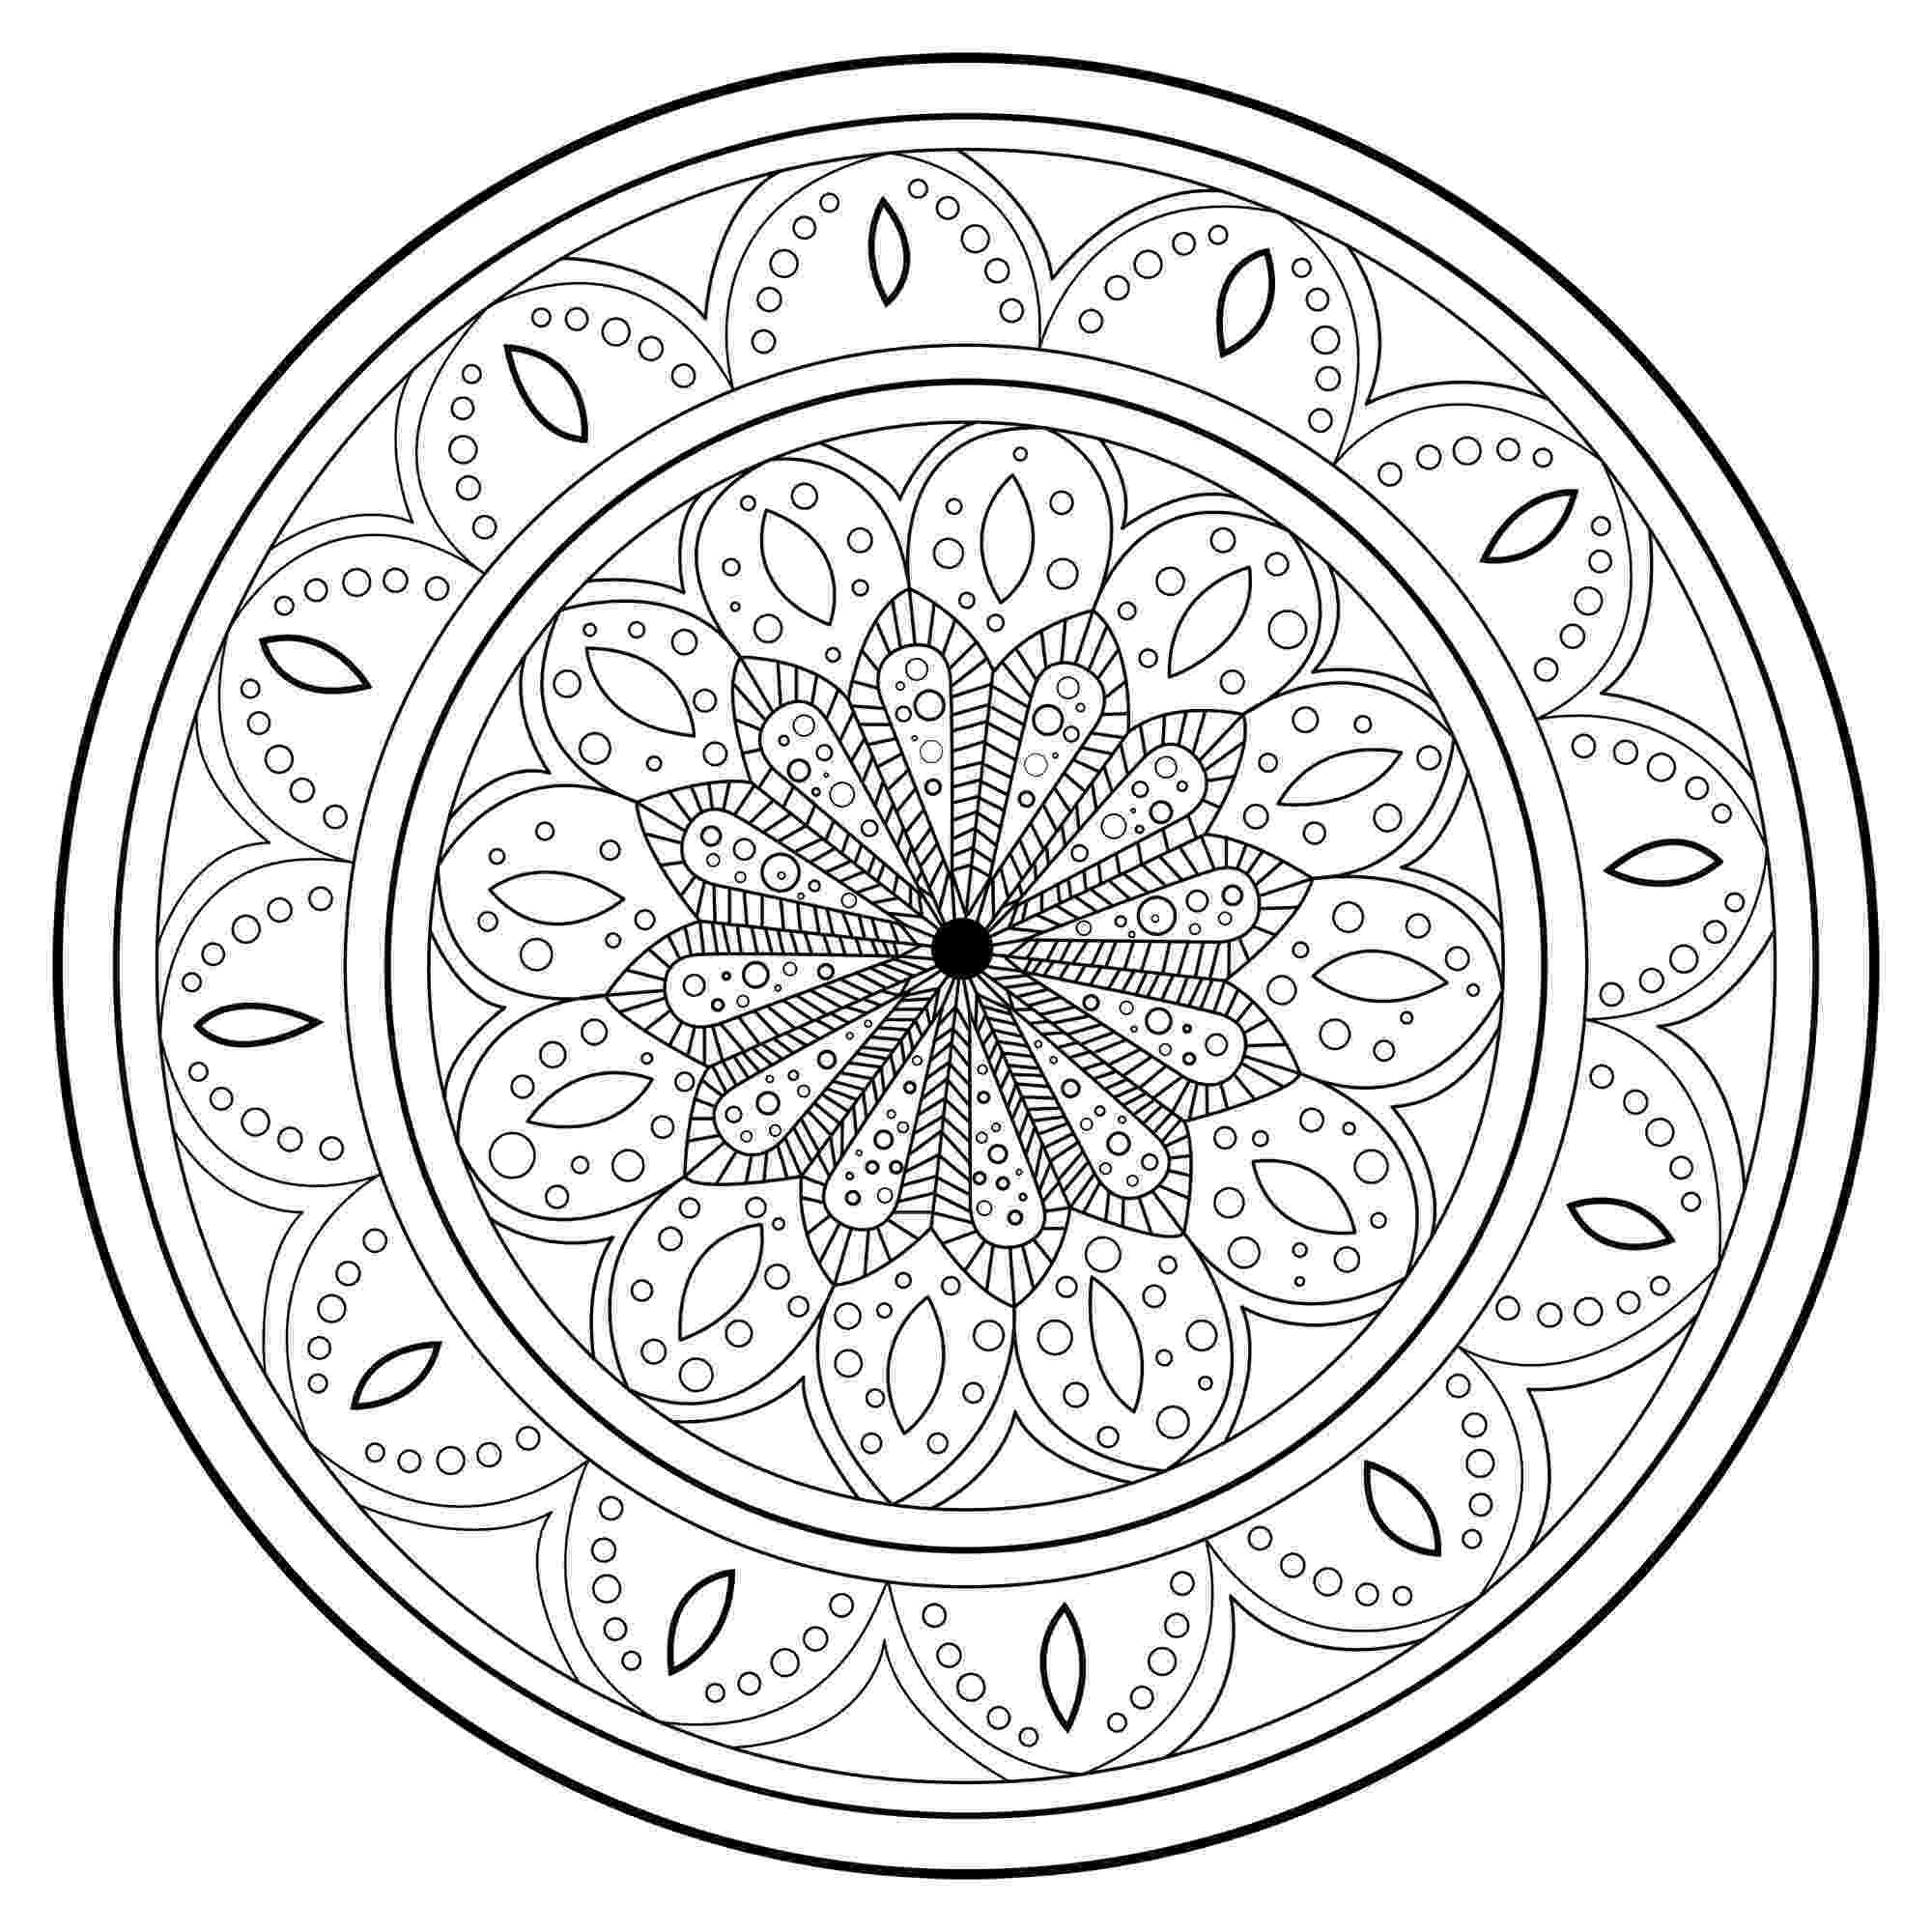 difficult mandala coloring pages 26 best images about mandalas on pinterest coloring pages difficult mandala coloring 